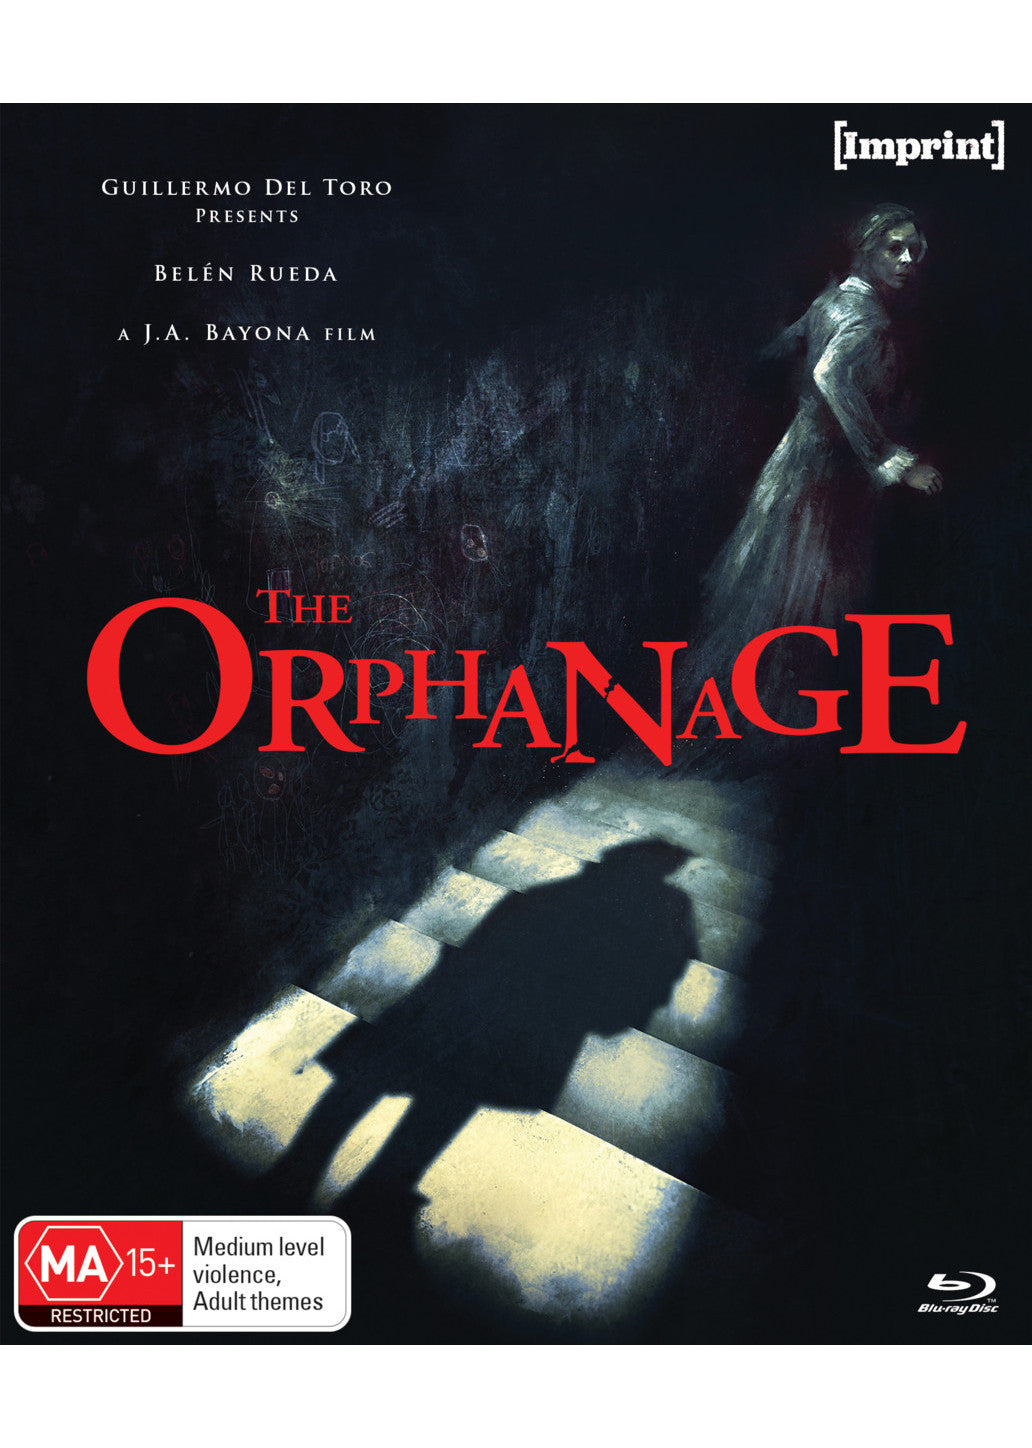 THE ORPHANAGE (IMPRINT COLLECTION #256) + BOOKLET